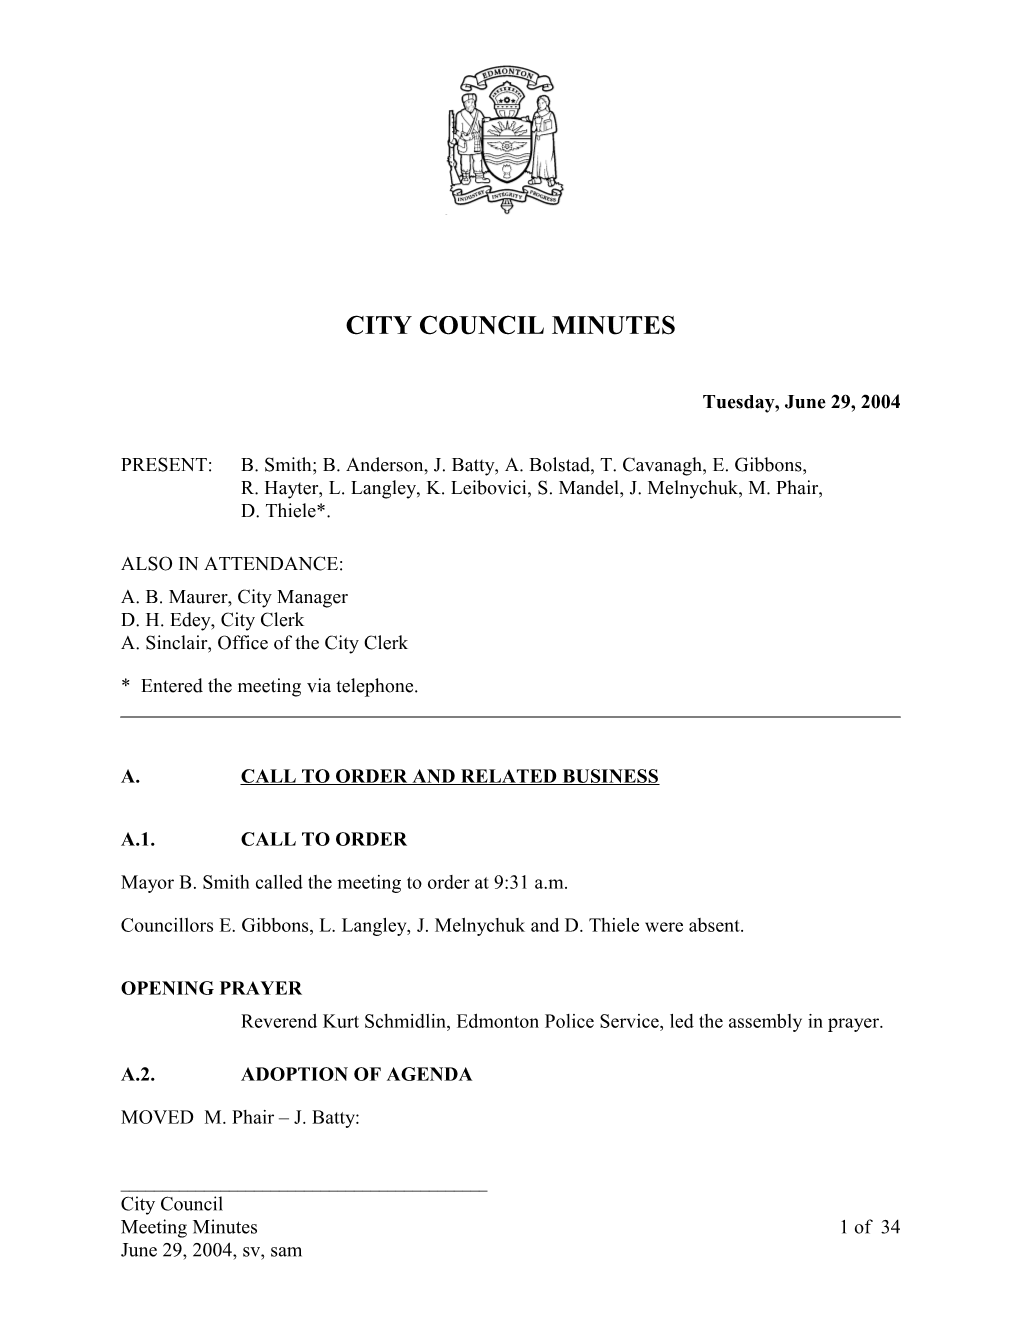 Minutes for City Council June 29, 2004 Meeting